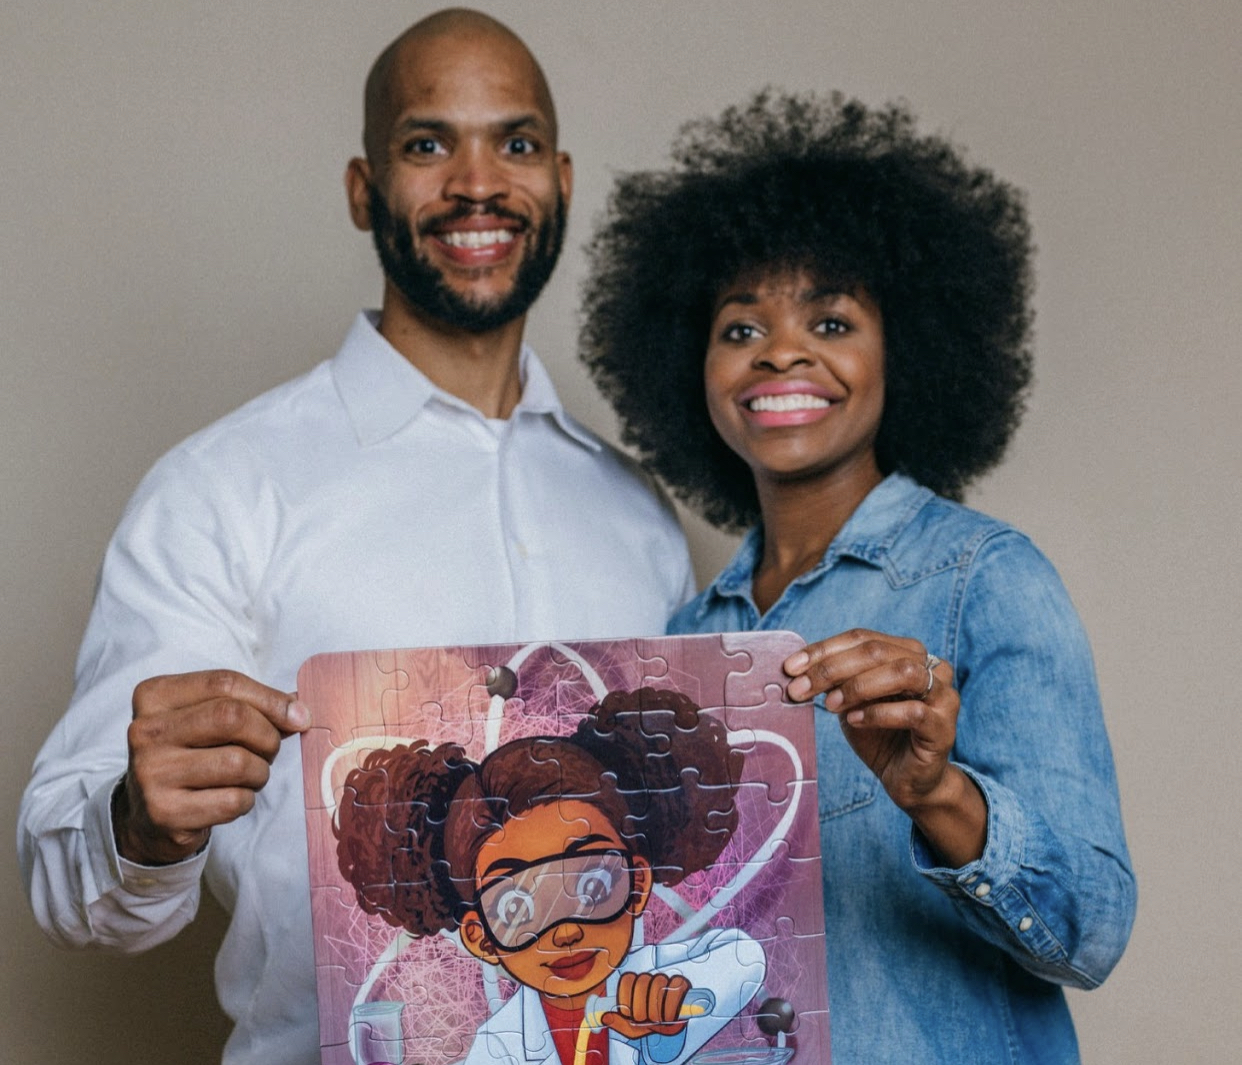 This HBCU Couple Provides Kids With the Representation They Need Through Puzzles